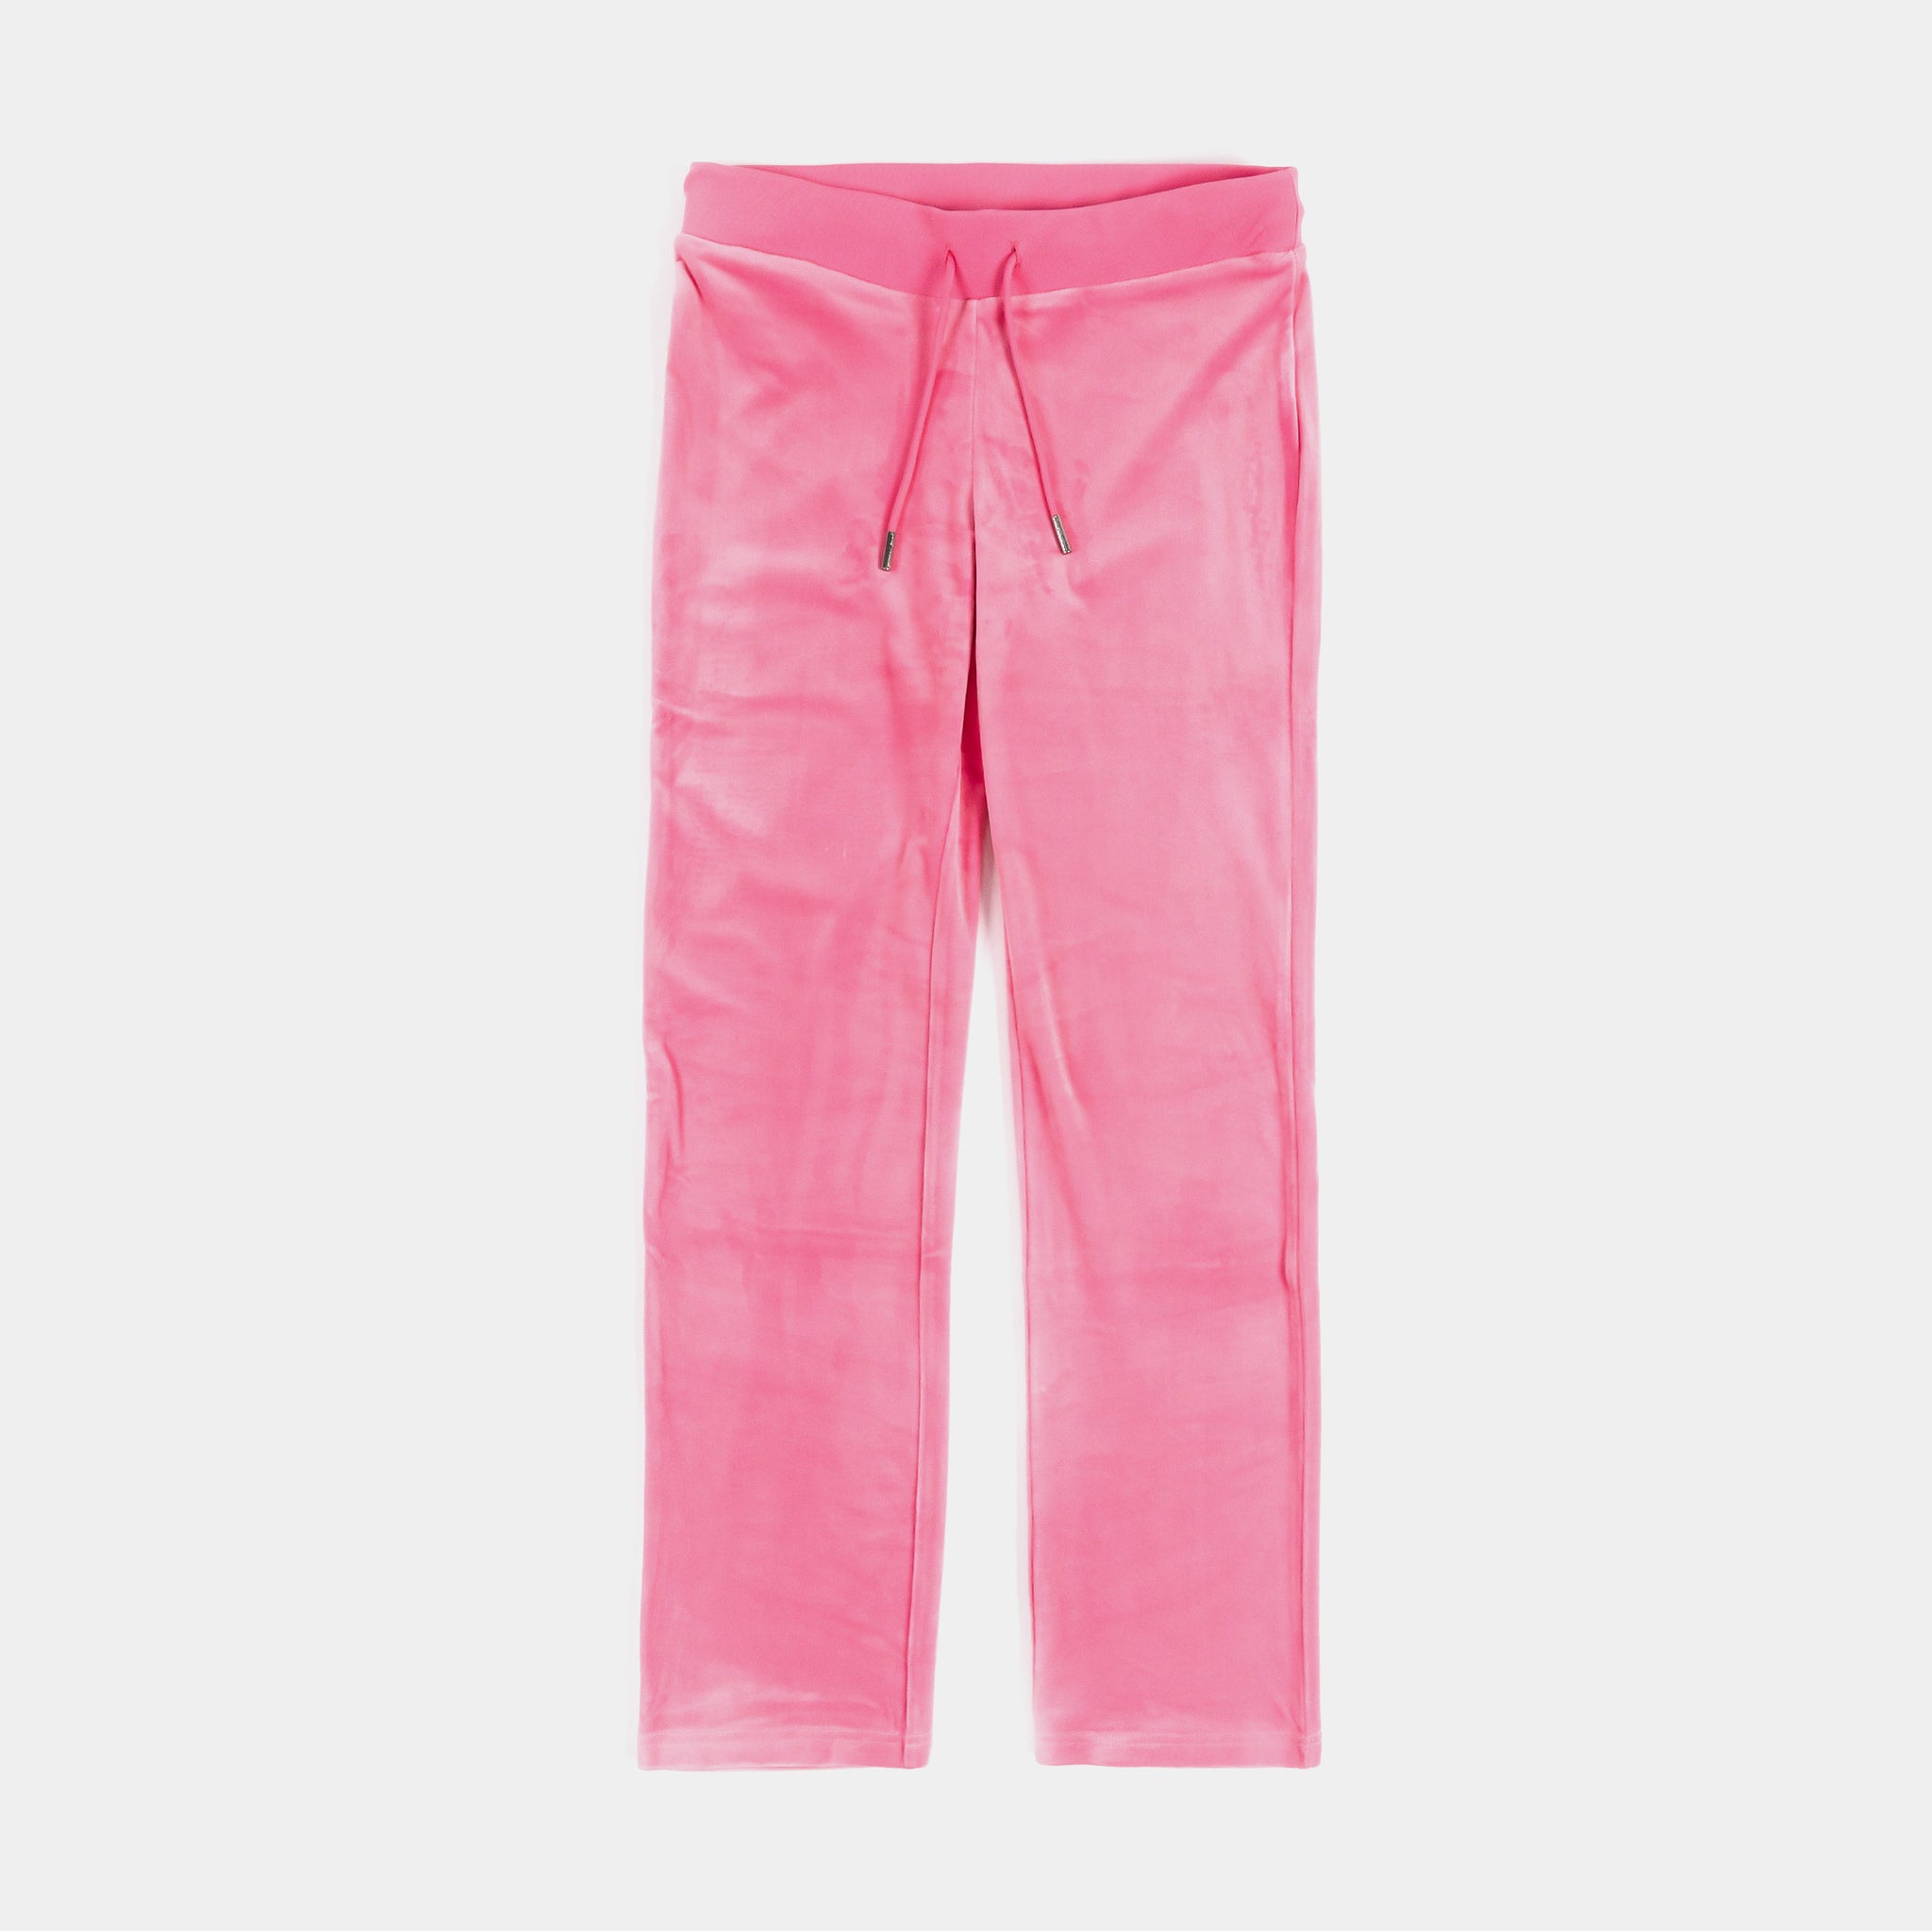 JUICY COUTURE OG Bling Womens Pants